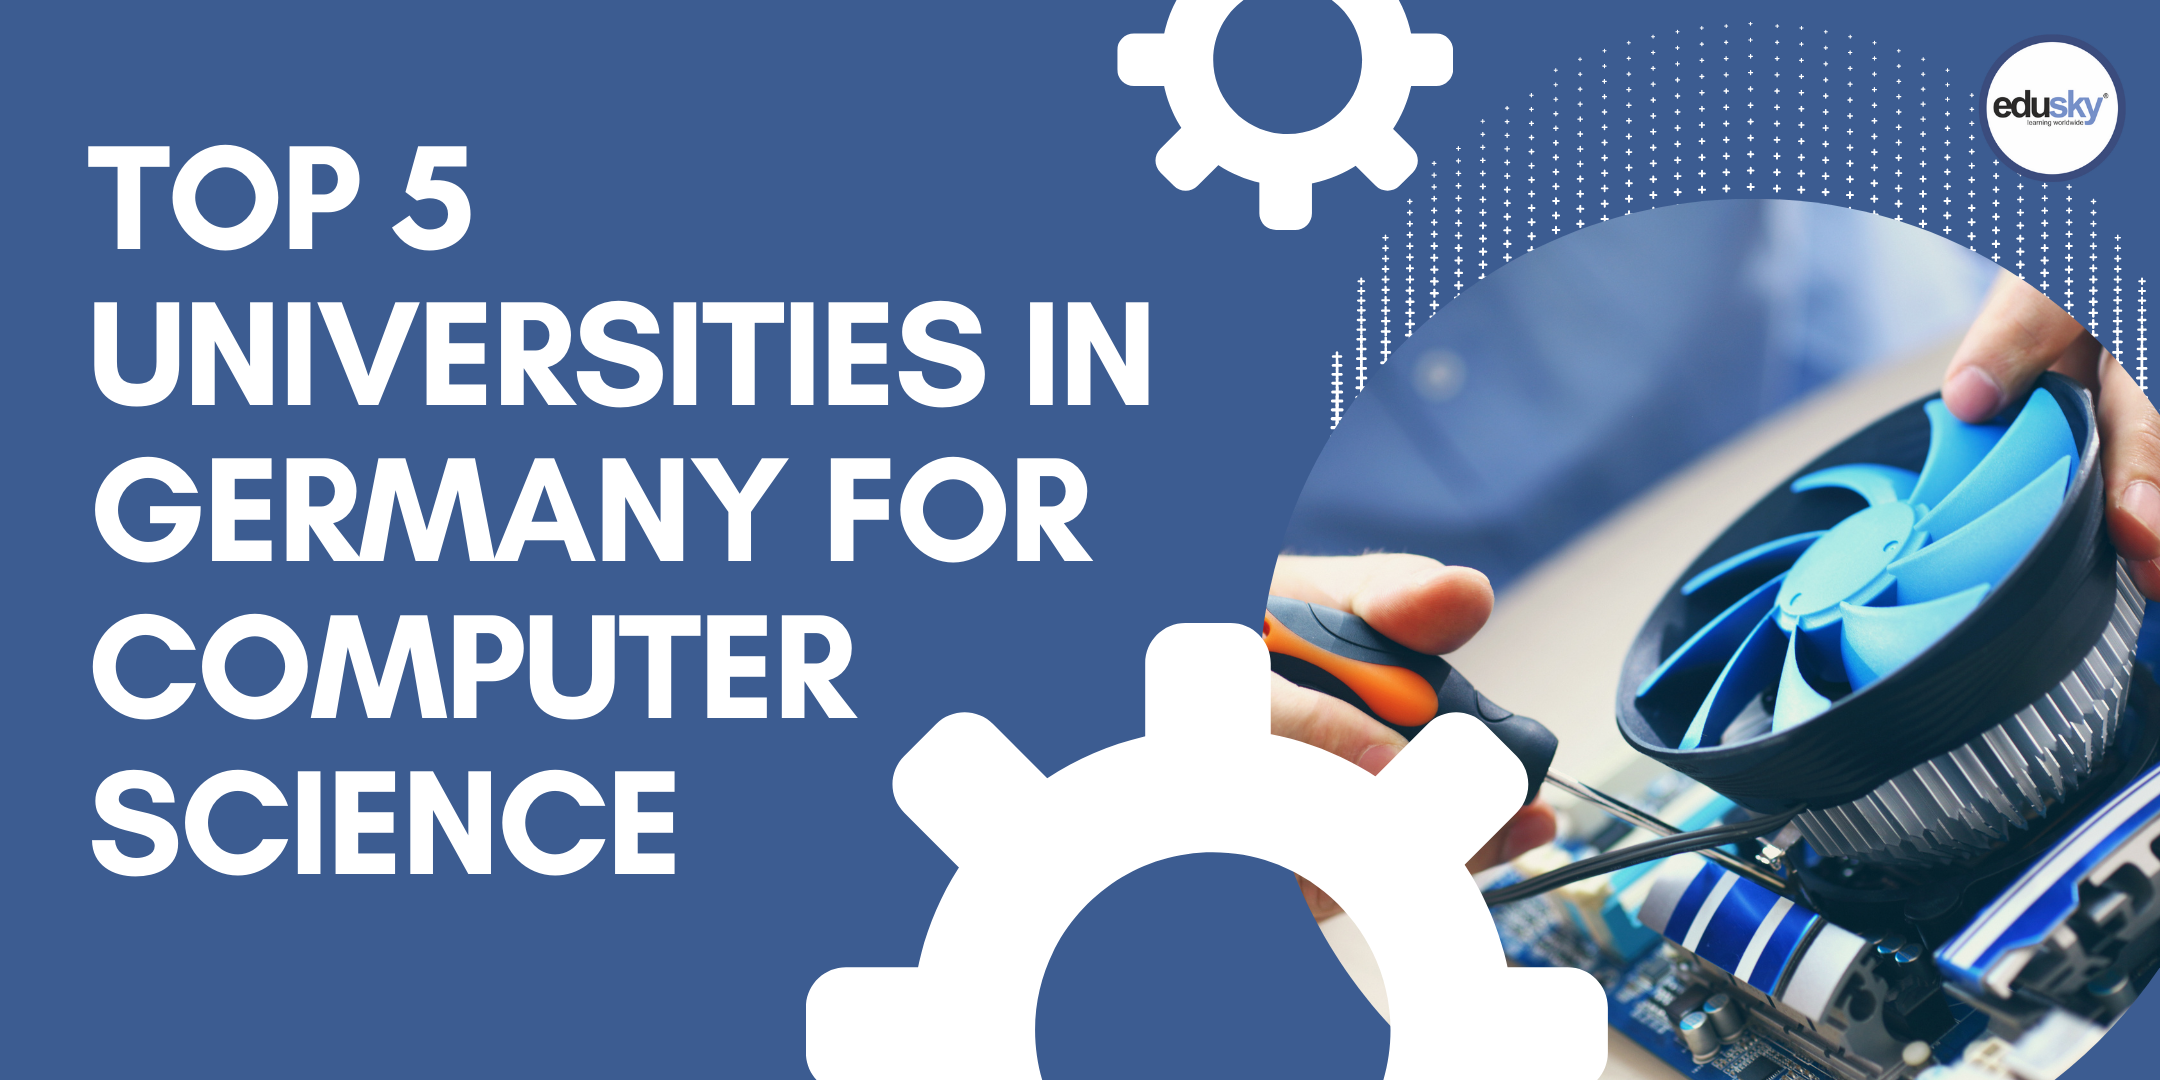 Top 5 Universities in Germany for Computer Science